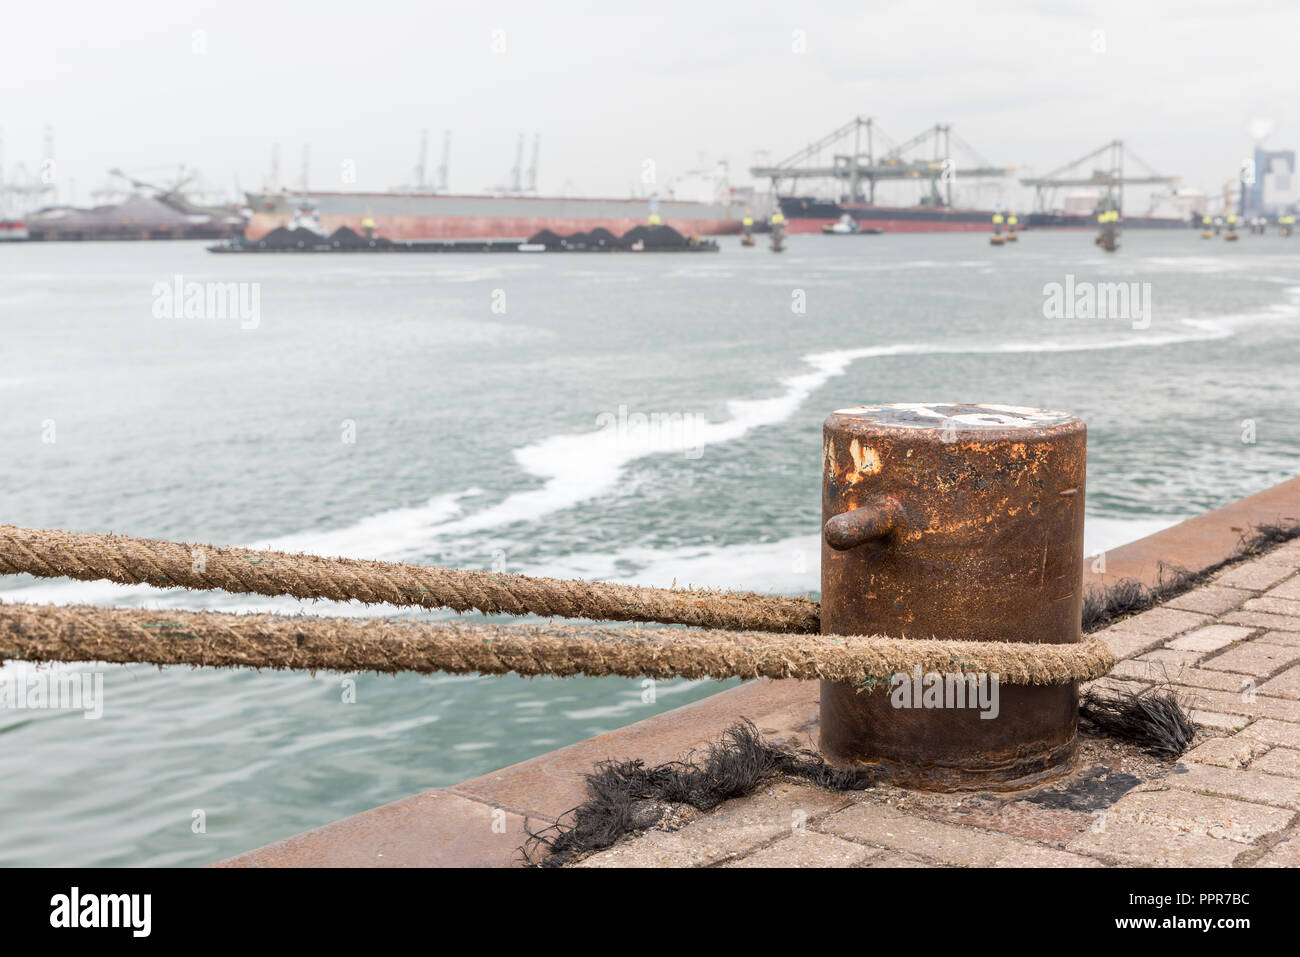 A iron bollard with a tied rope on a quay in the Port of Rotterdam in the Netherlands. In the background, slightly out of focus, is the industrial are Stock Photo